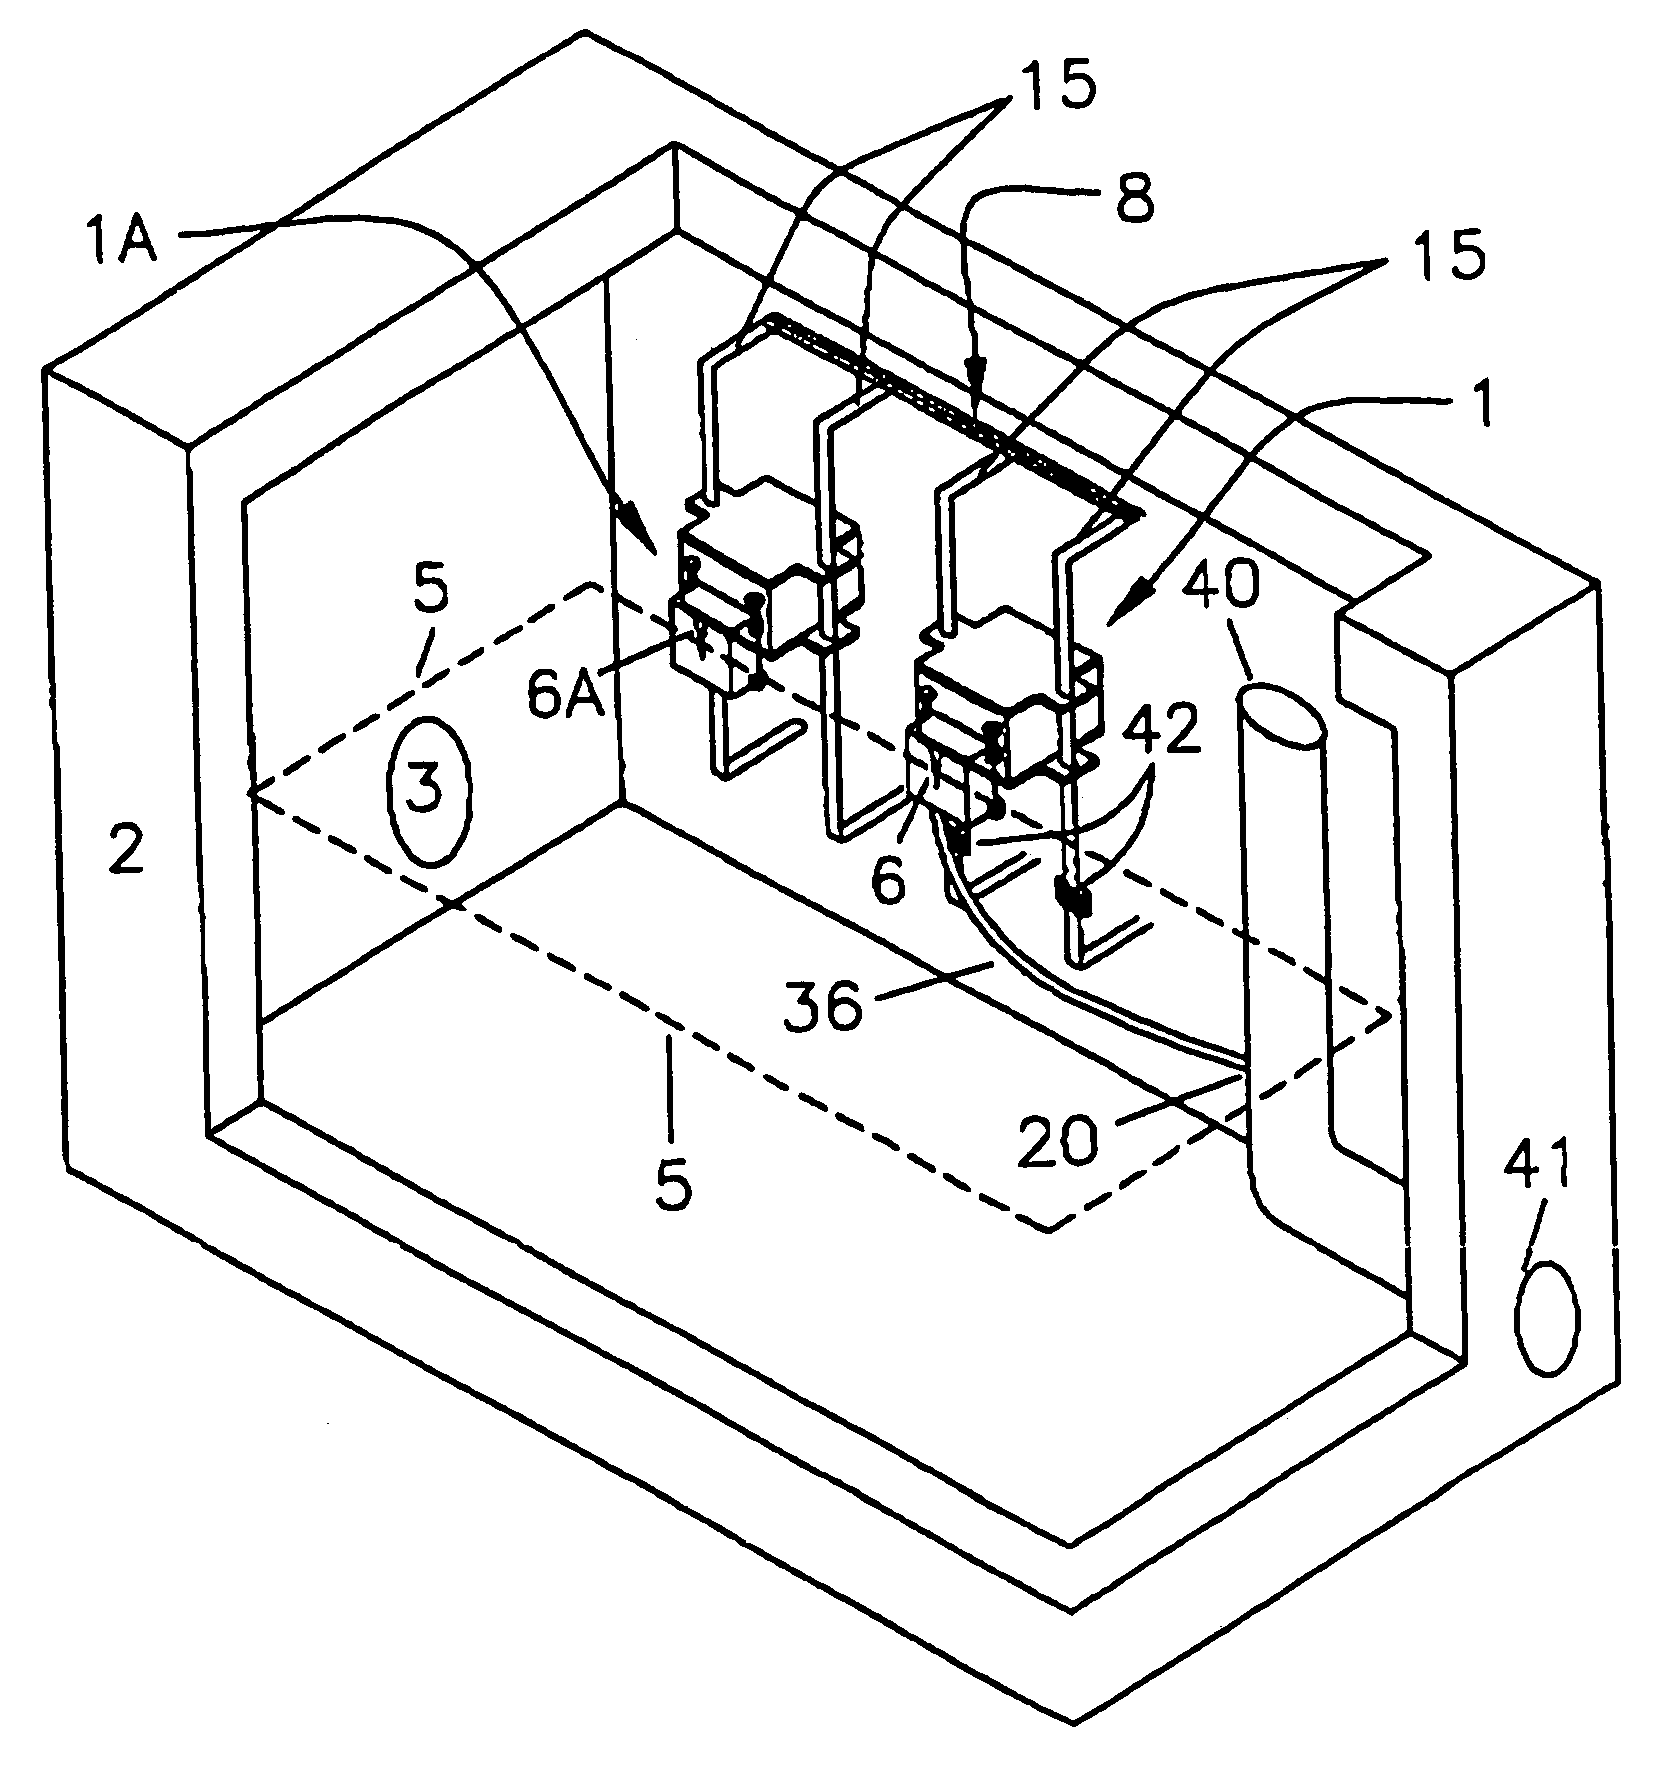 Passive method for obtaining controlled drainage from a vessel